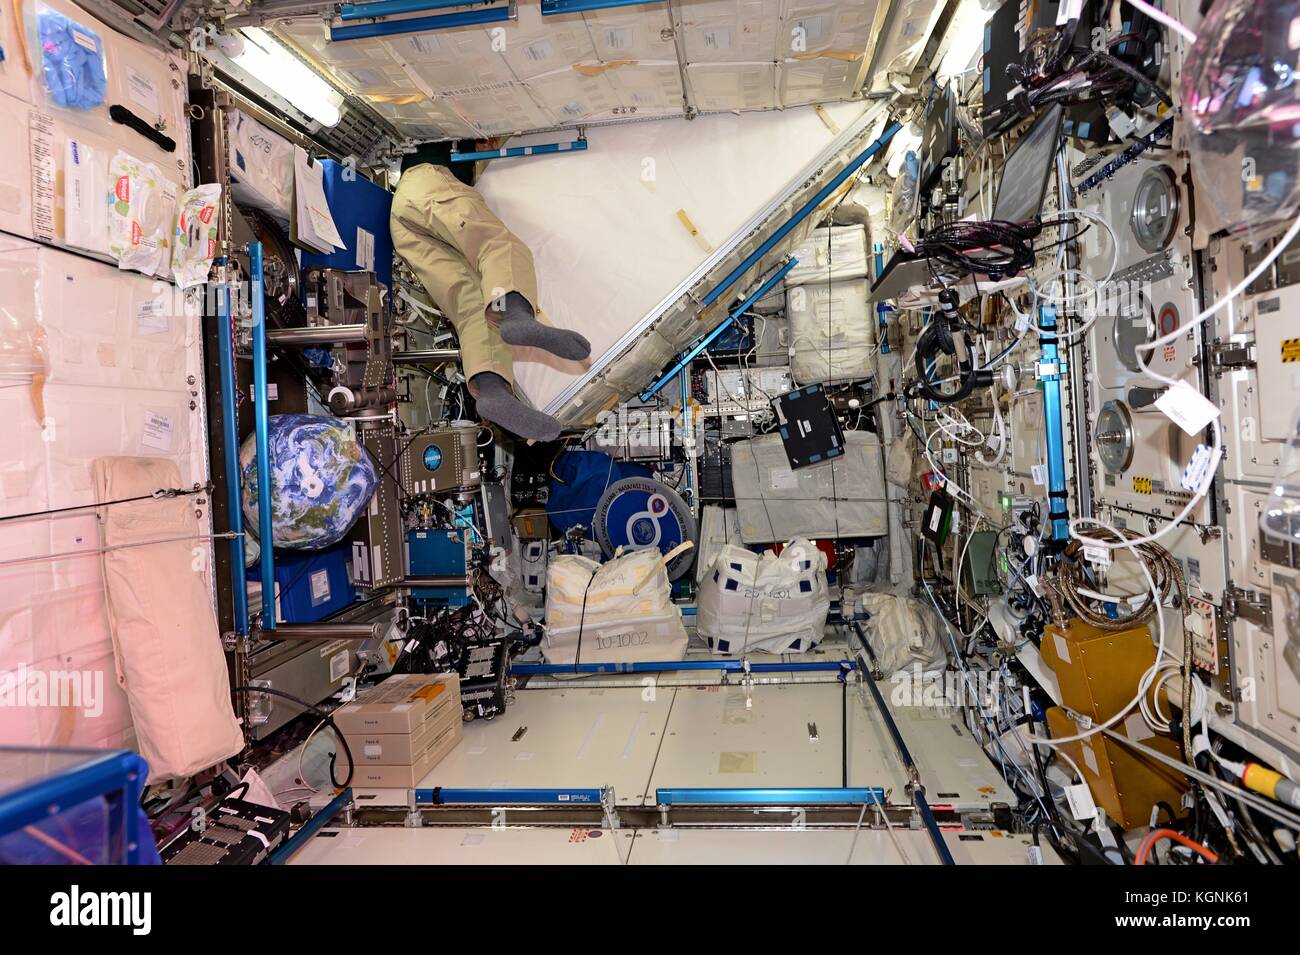 International Space Station, Earth Orbit. 09th Nov, 2017. The legs of Expedition 53 American astronaut Randy Bresnik stick out as he maneuvers around racks of gear that line the International Space Station for storage November 9, 2017 in Earth Orbit. Credit: Planetpix/Alamy Live News Stock Photo